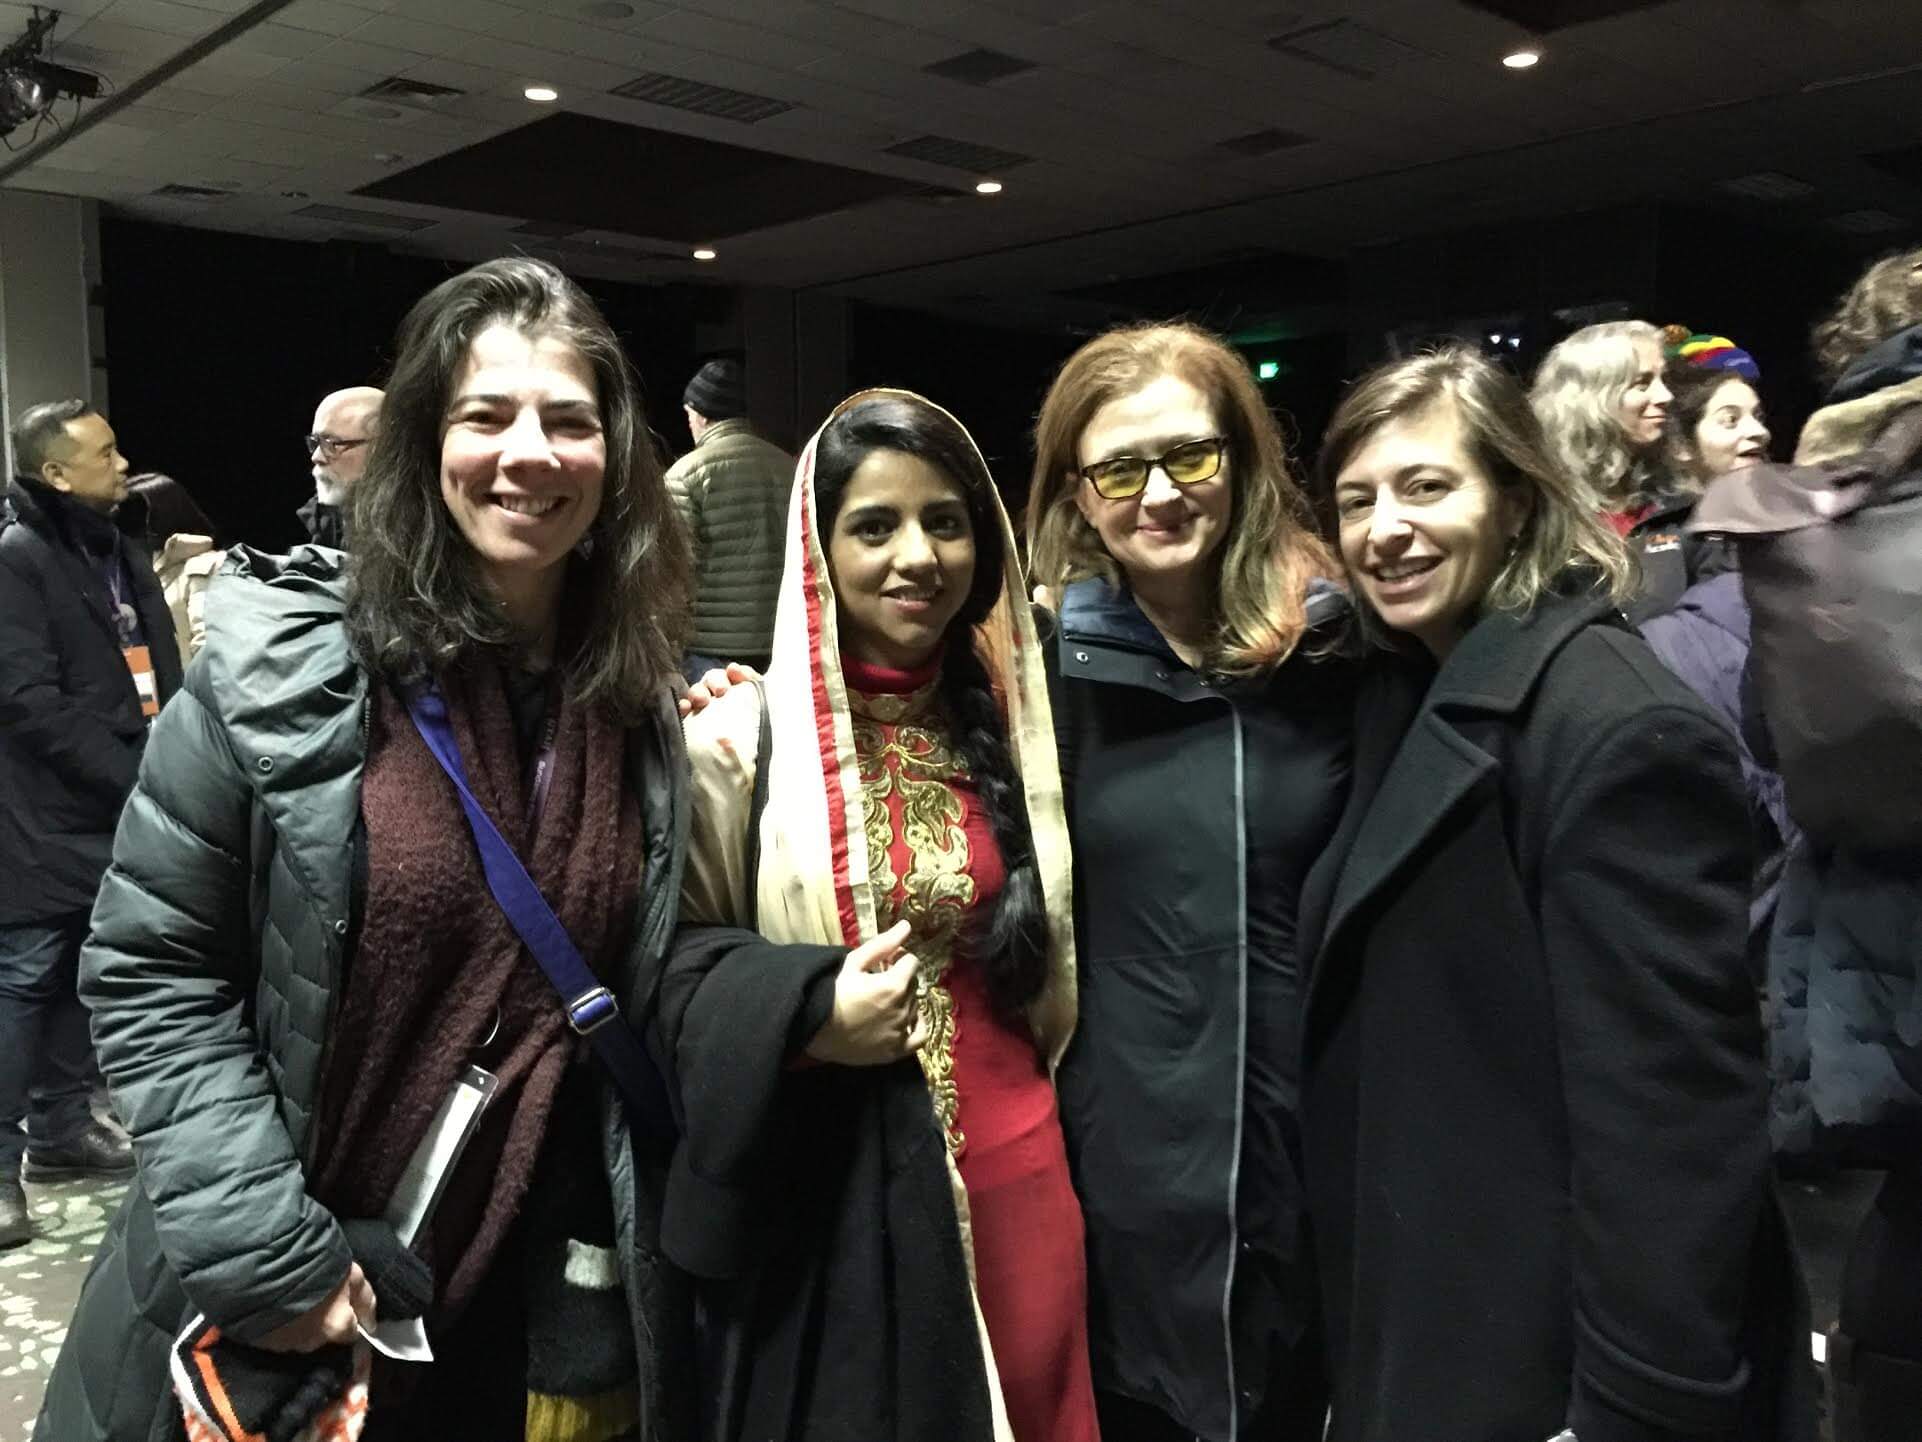 Executive Director Jenni Wolfson, Co-Founder Wendy Ettinger, and Co-Founder Julie Parker Benello with Sonita Alizadeh at a Sundance screening of SONITA